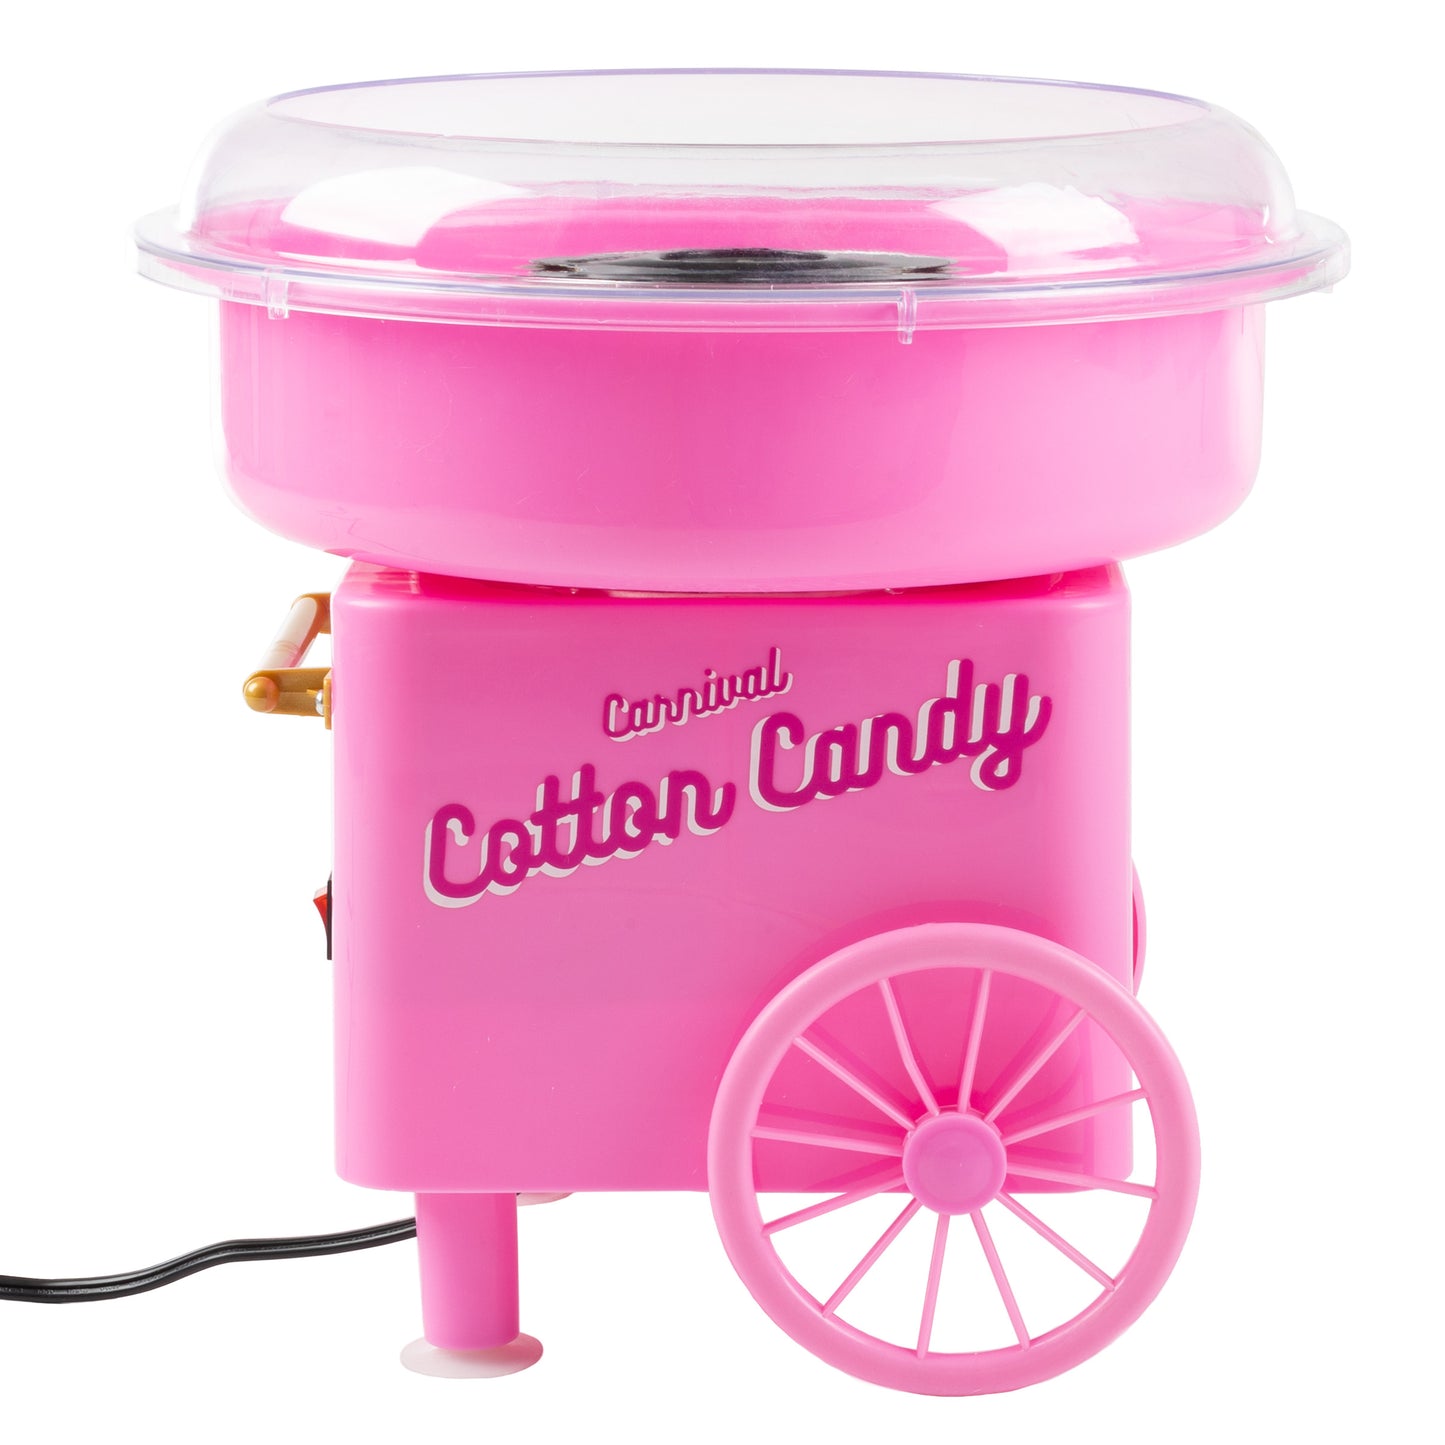 Countertop Cotton Candy Machine – Pink